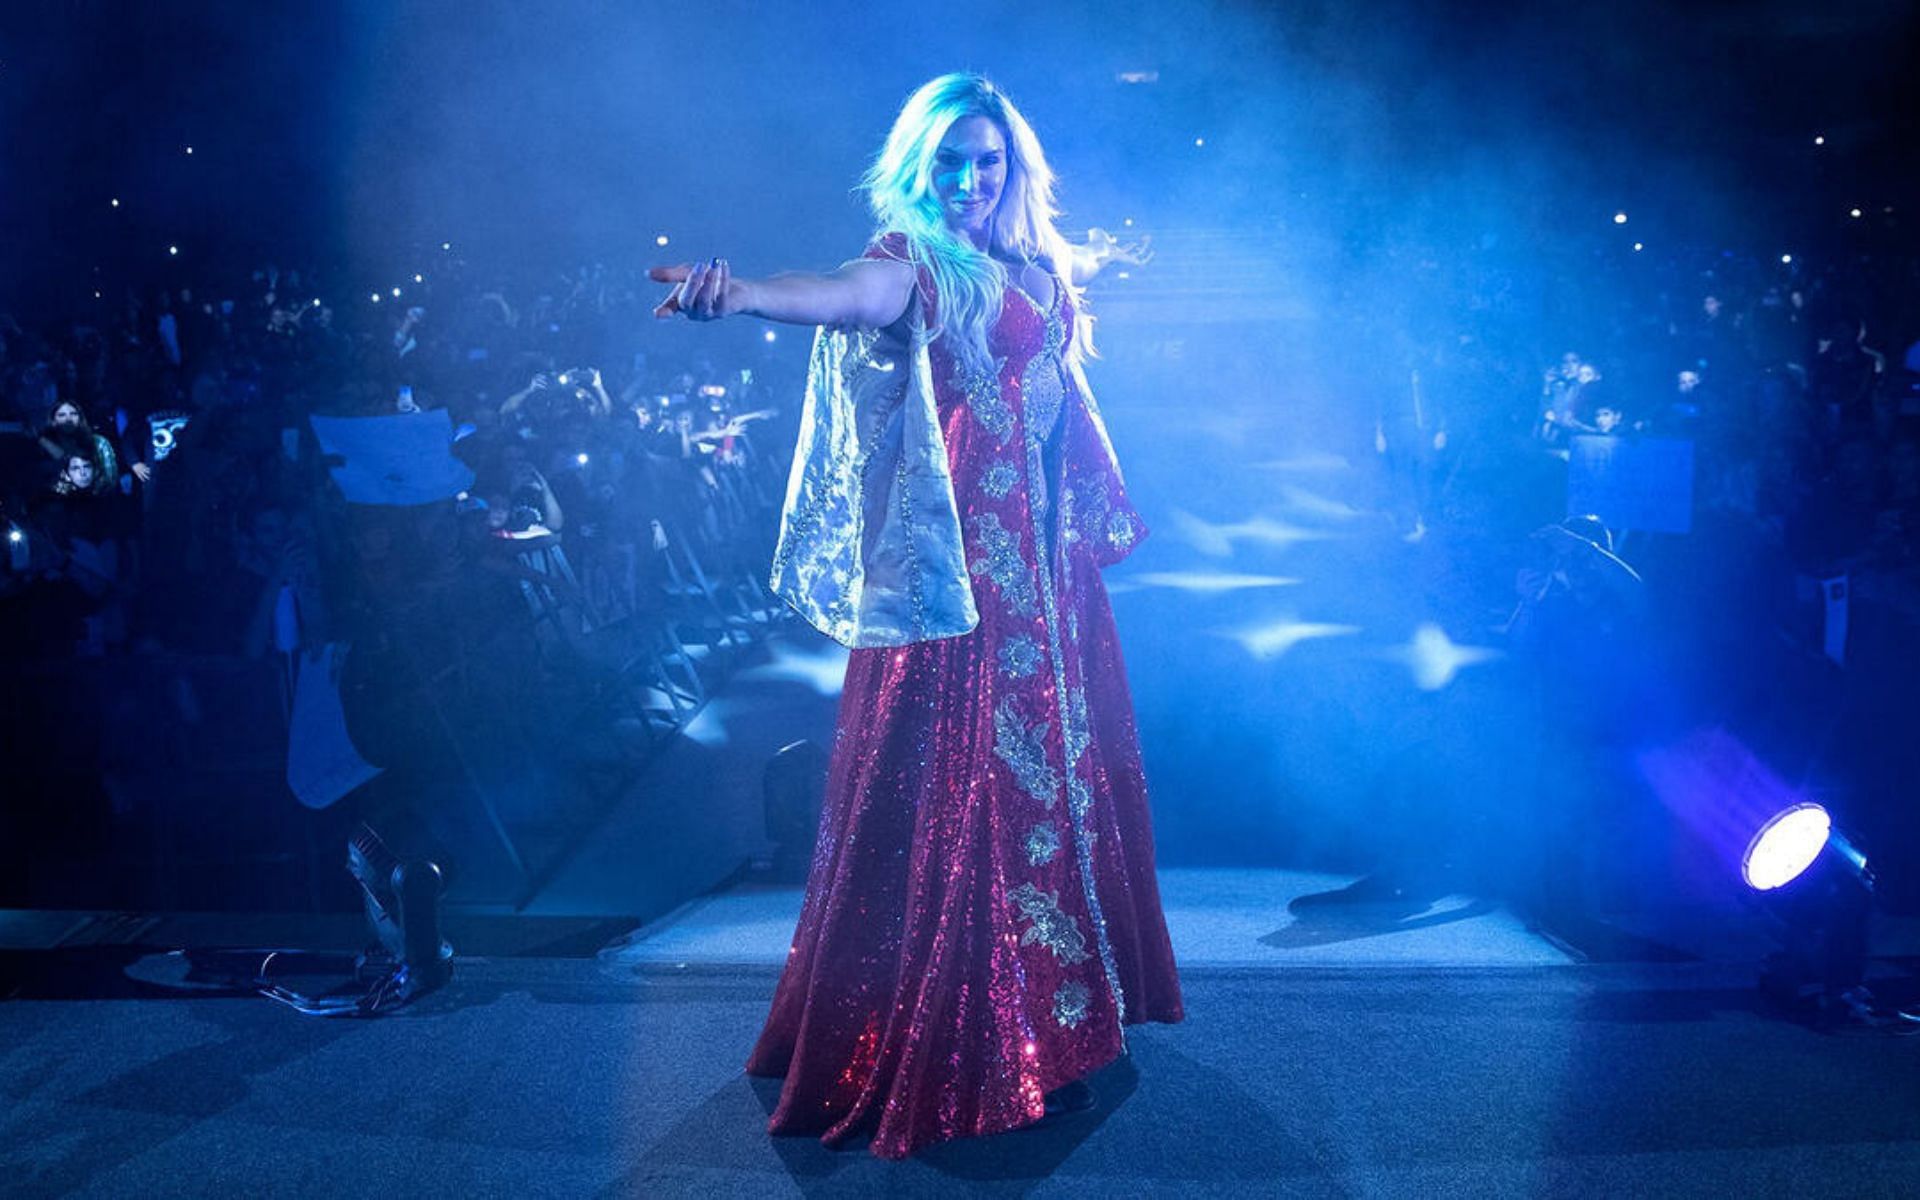 Charlotte Flair is wrestling royalty!